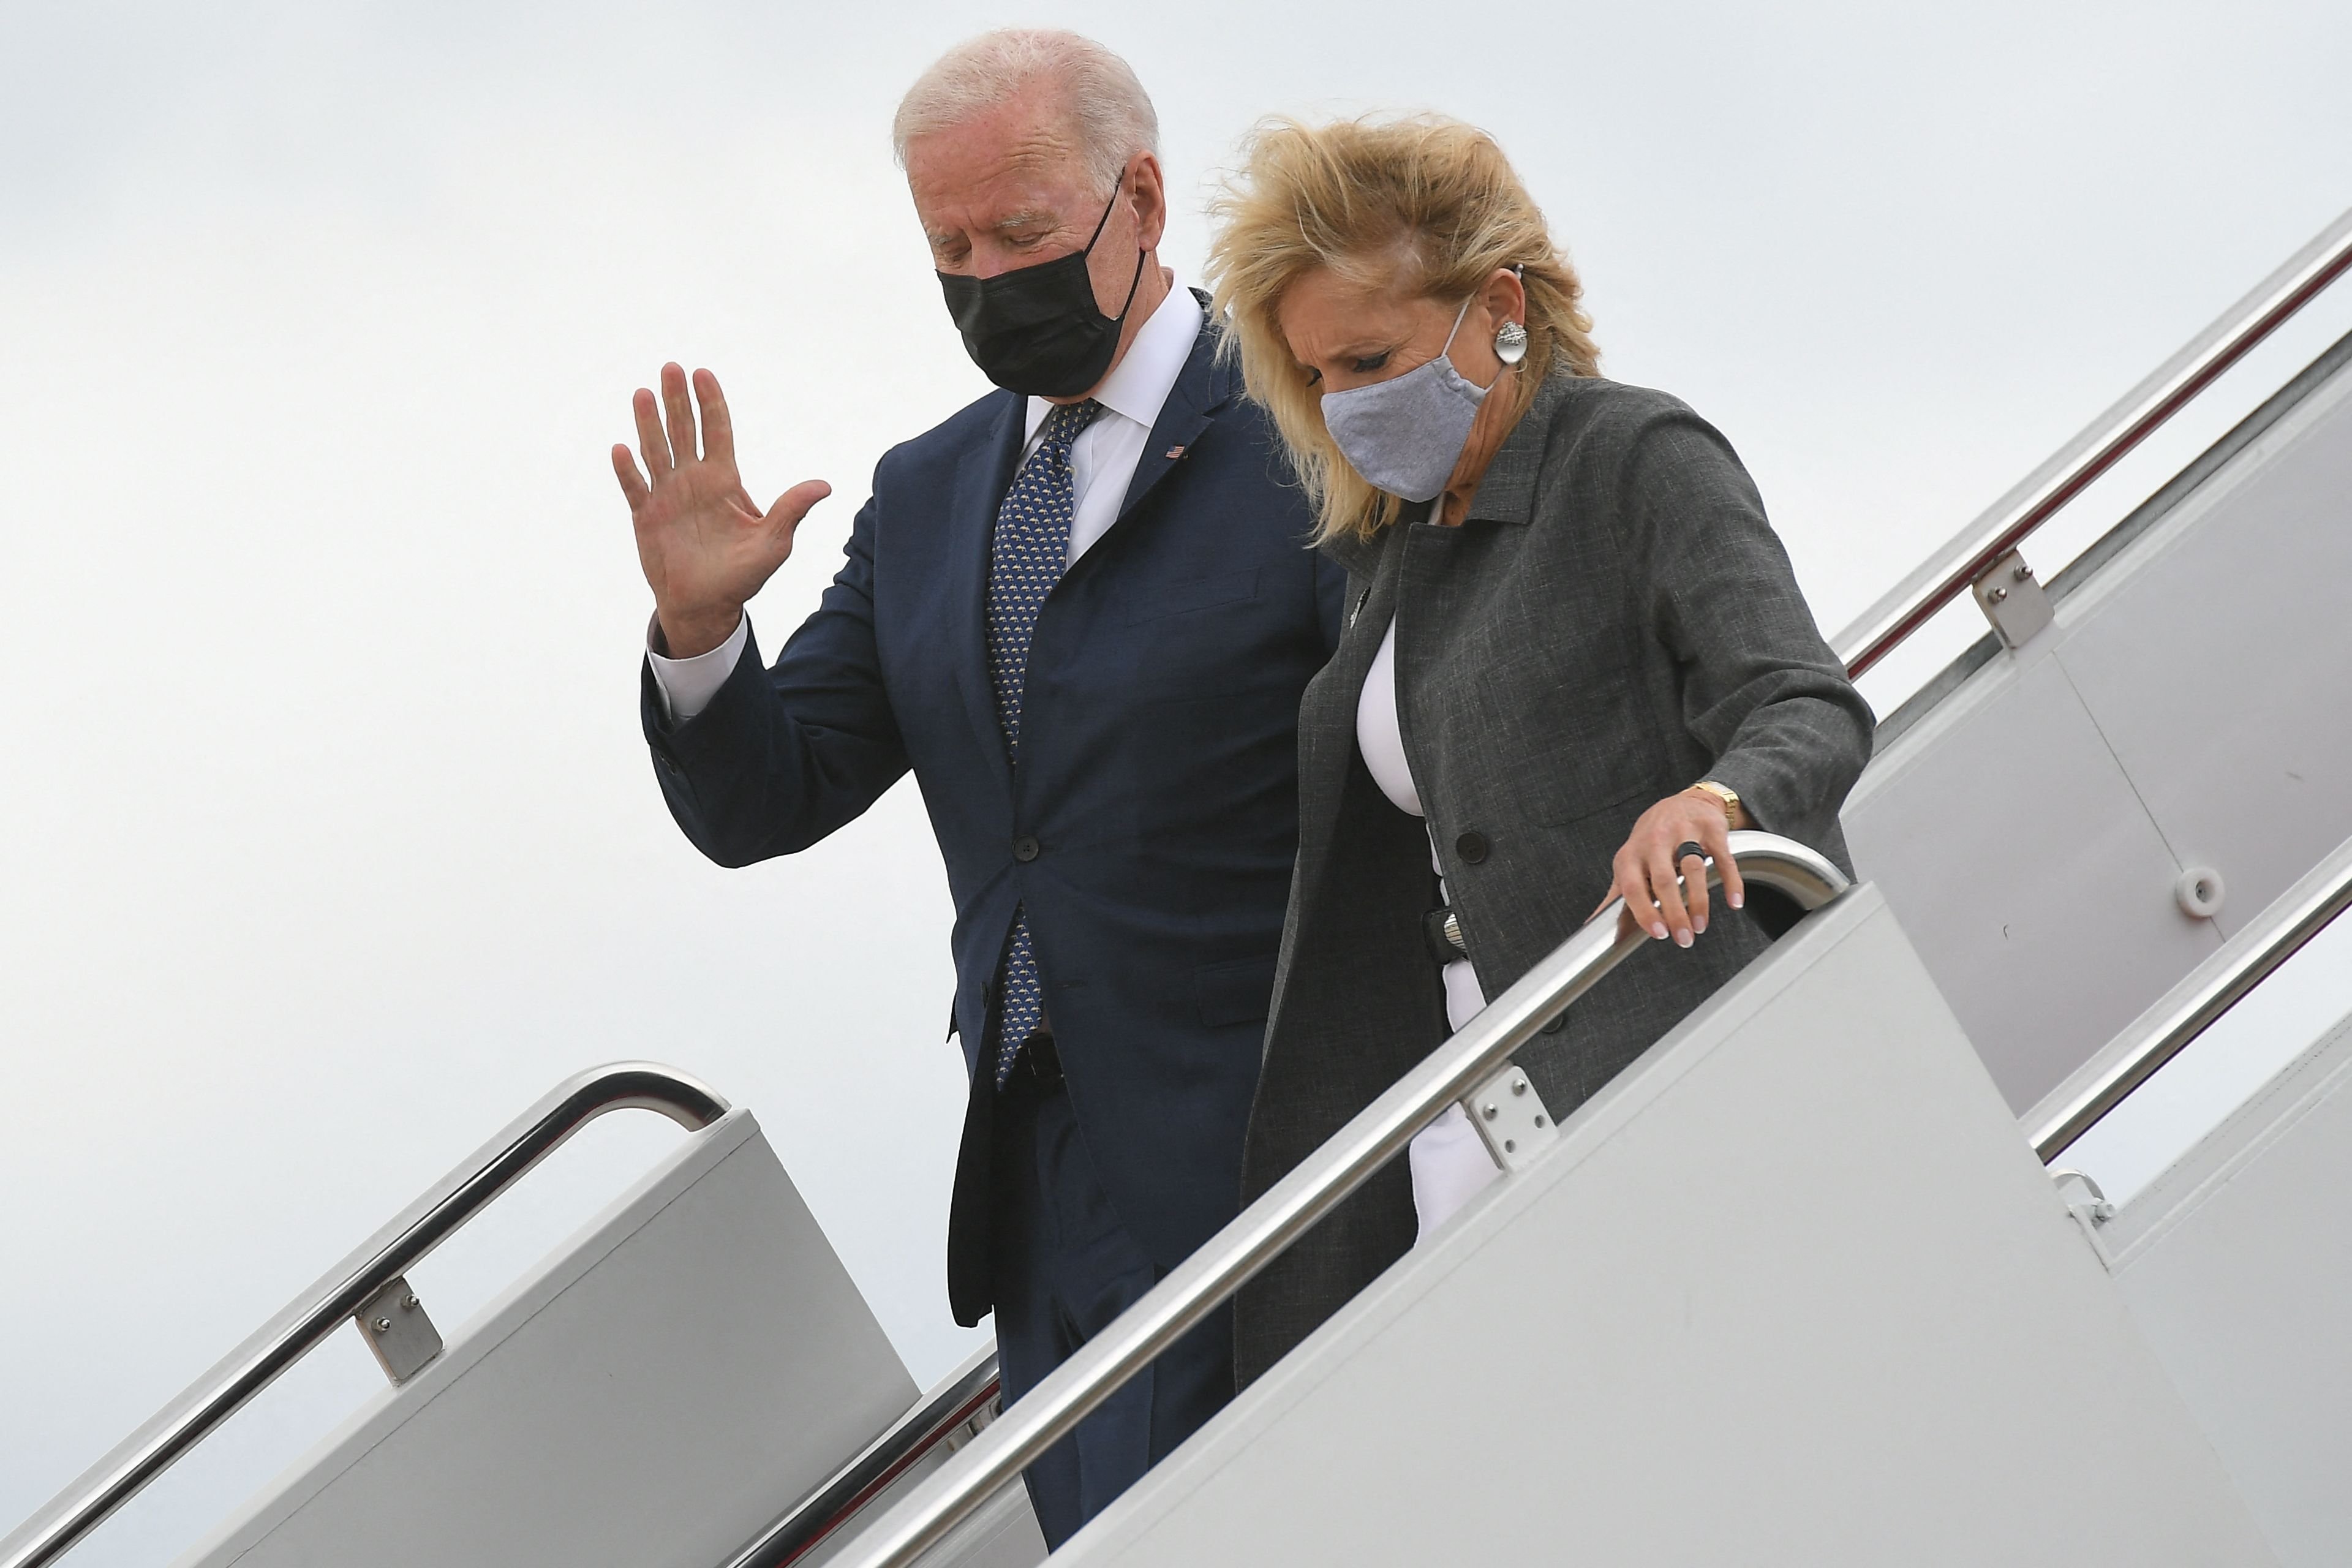 Joe Biden and Jill Biden stepping off Air Force One upon arrival at Andrews Air Force Base in Maryland, Virginia | Photo: Mandel Ngan/AFP via Getty Images